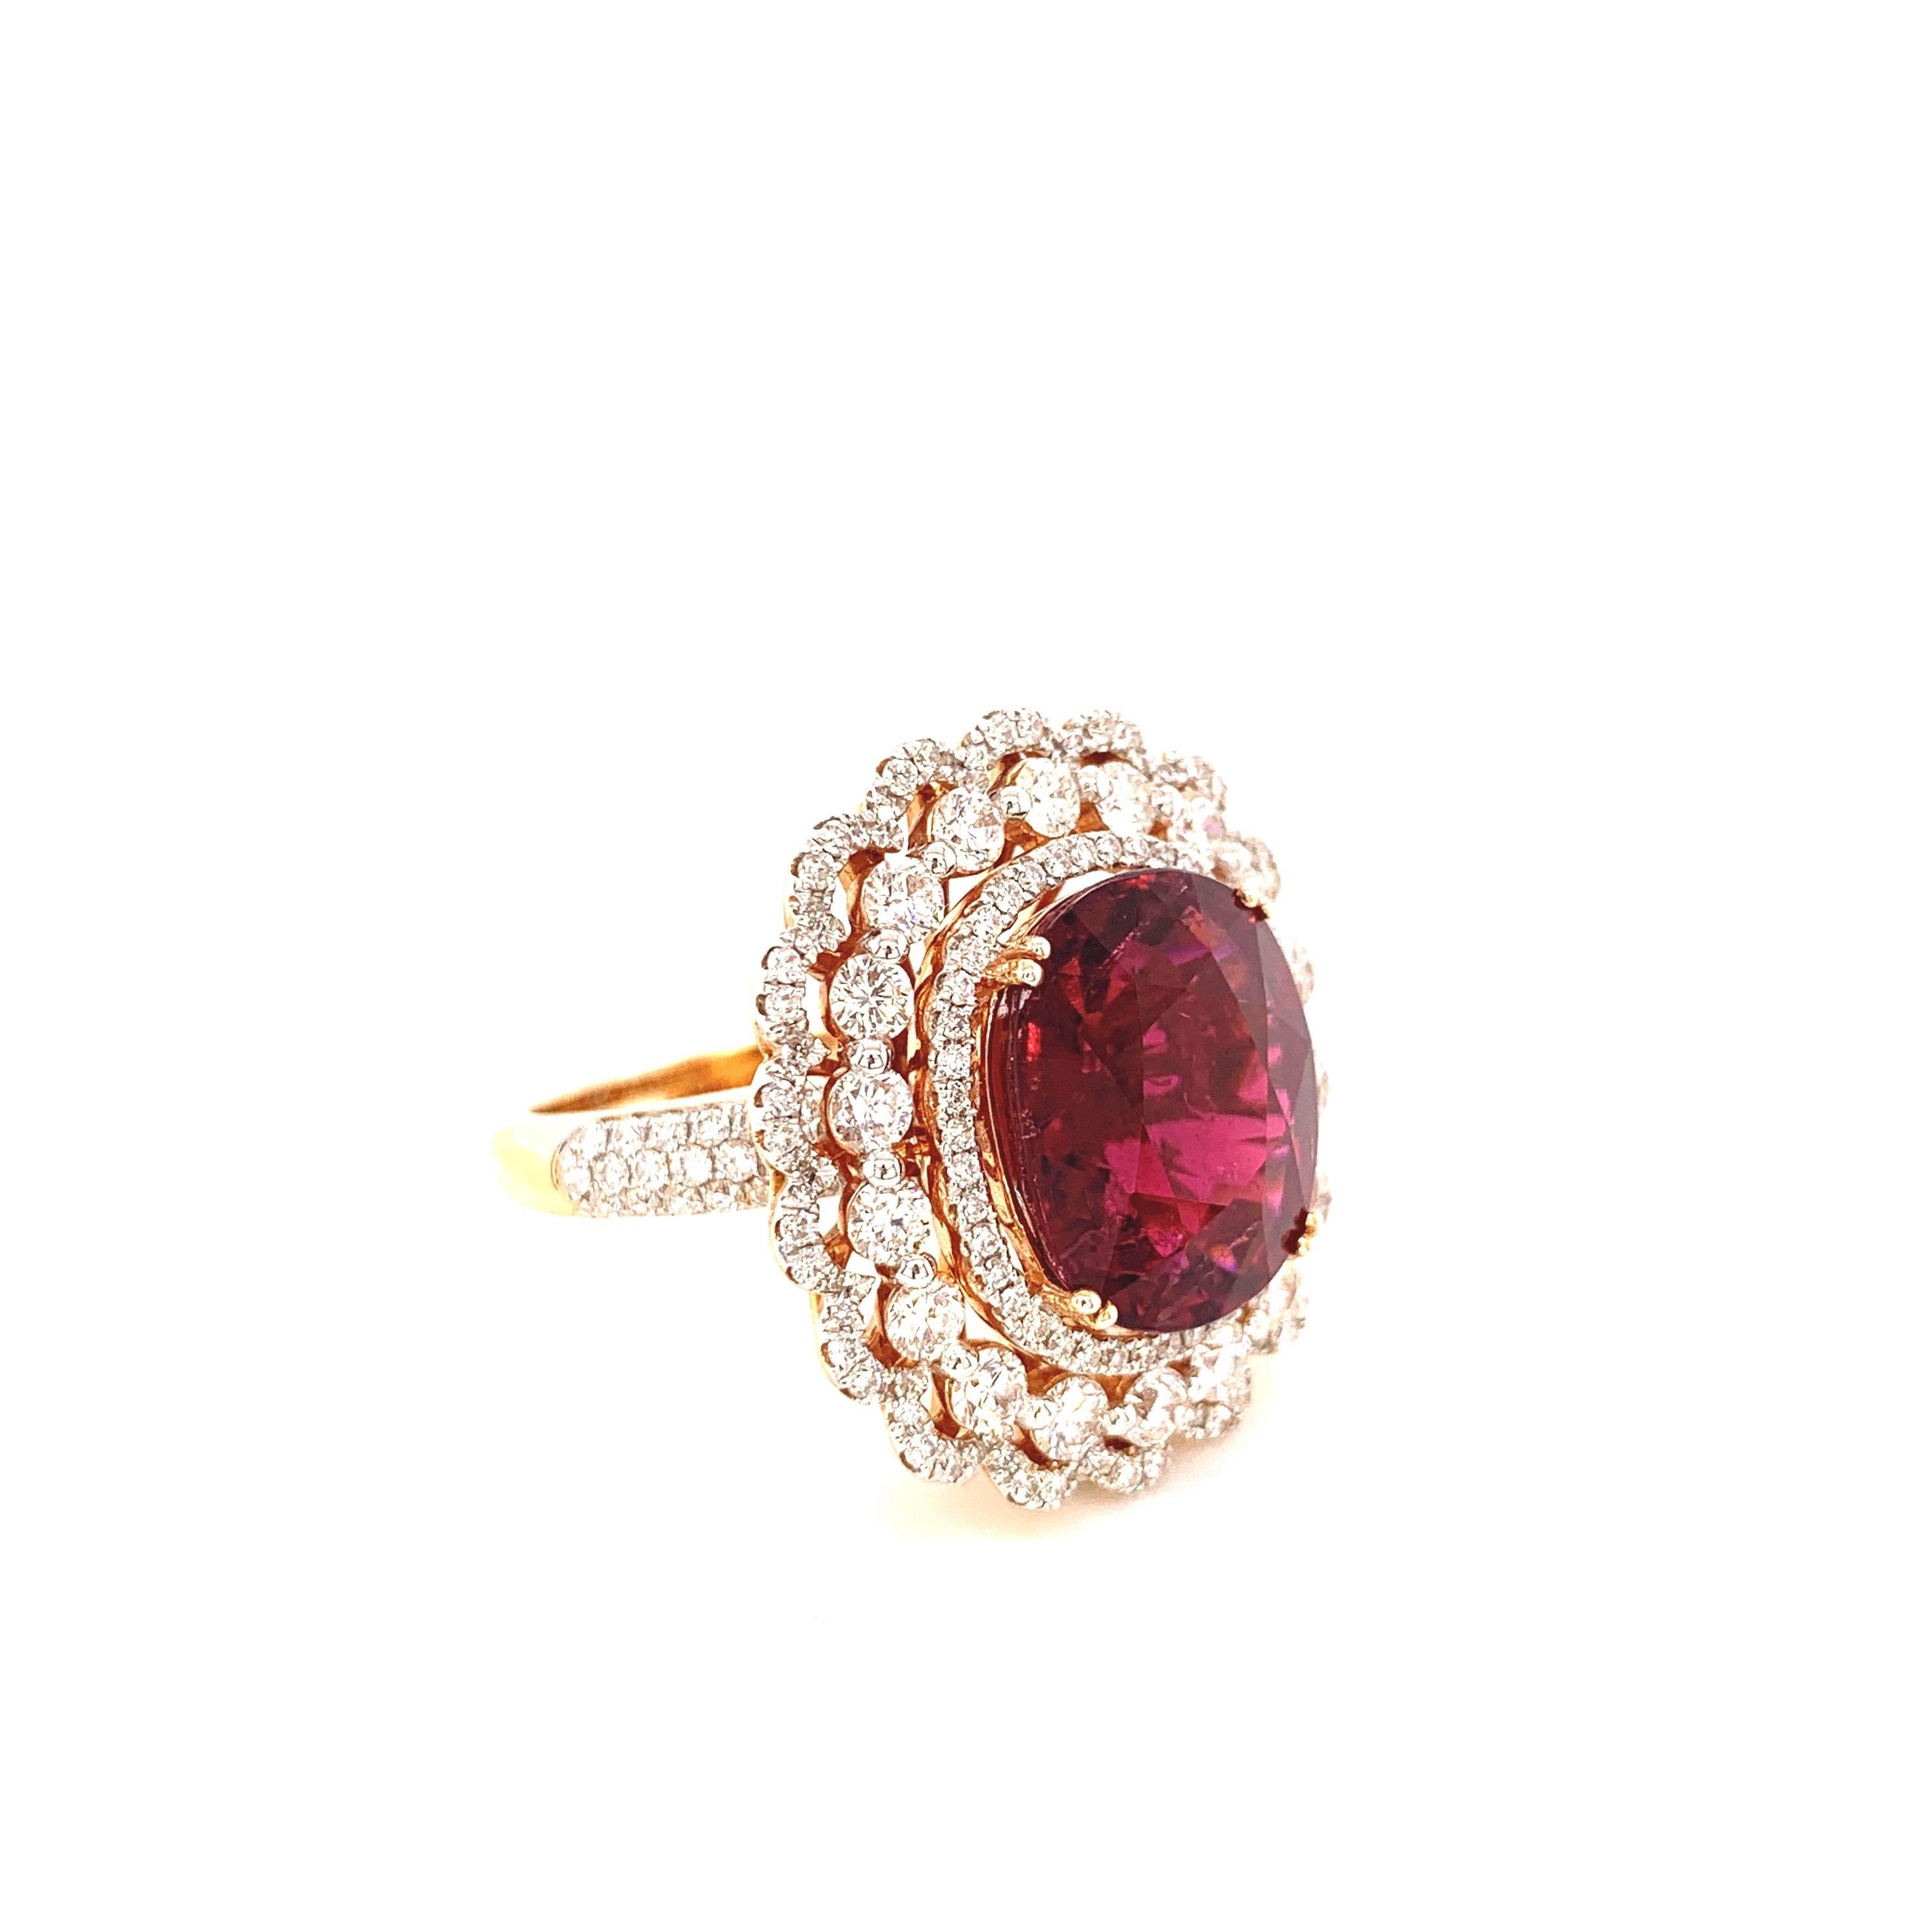 Glamorous tourmaline diamond cocktail ring. High lustre, transparent, deep reddish-pink, 7.87 carats cushion brilliant-cut natural tourmaline (known as rubellite) set in high profile, encased in basket mounting with eight bead prongs. Accented with